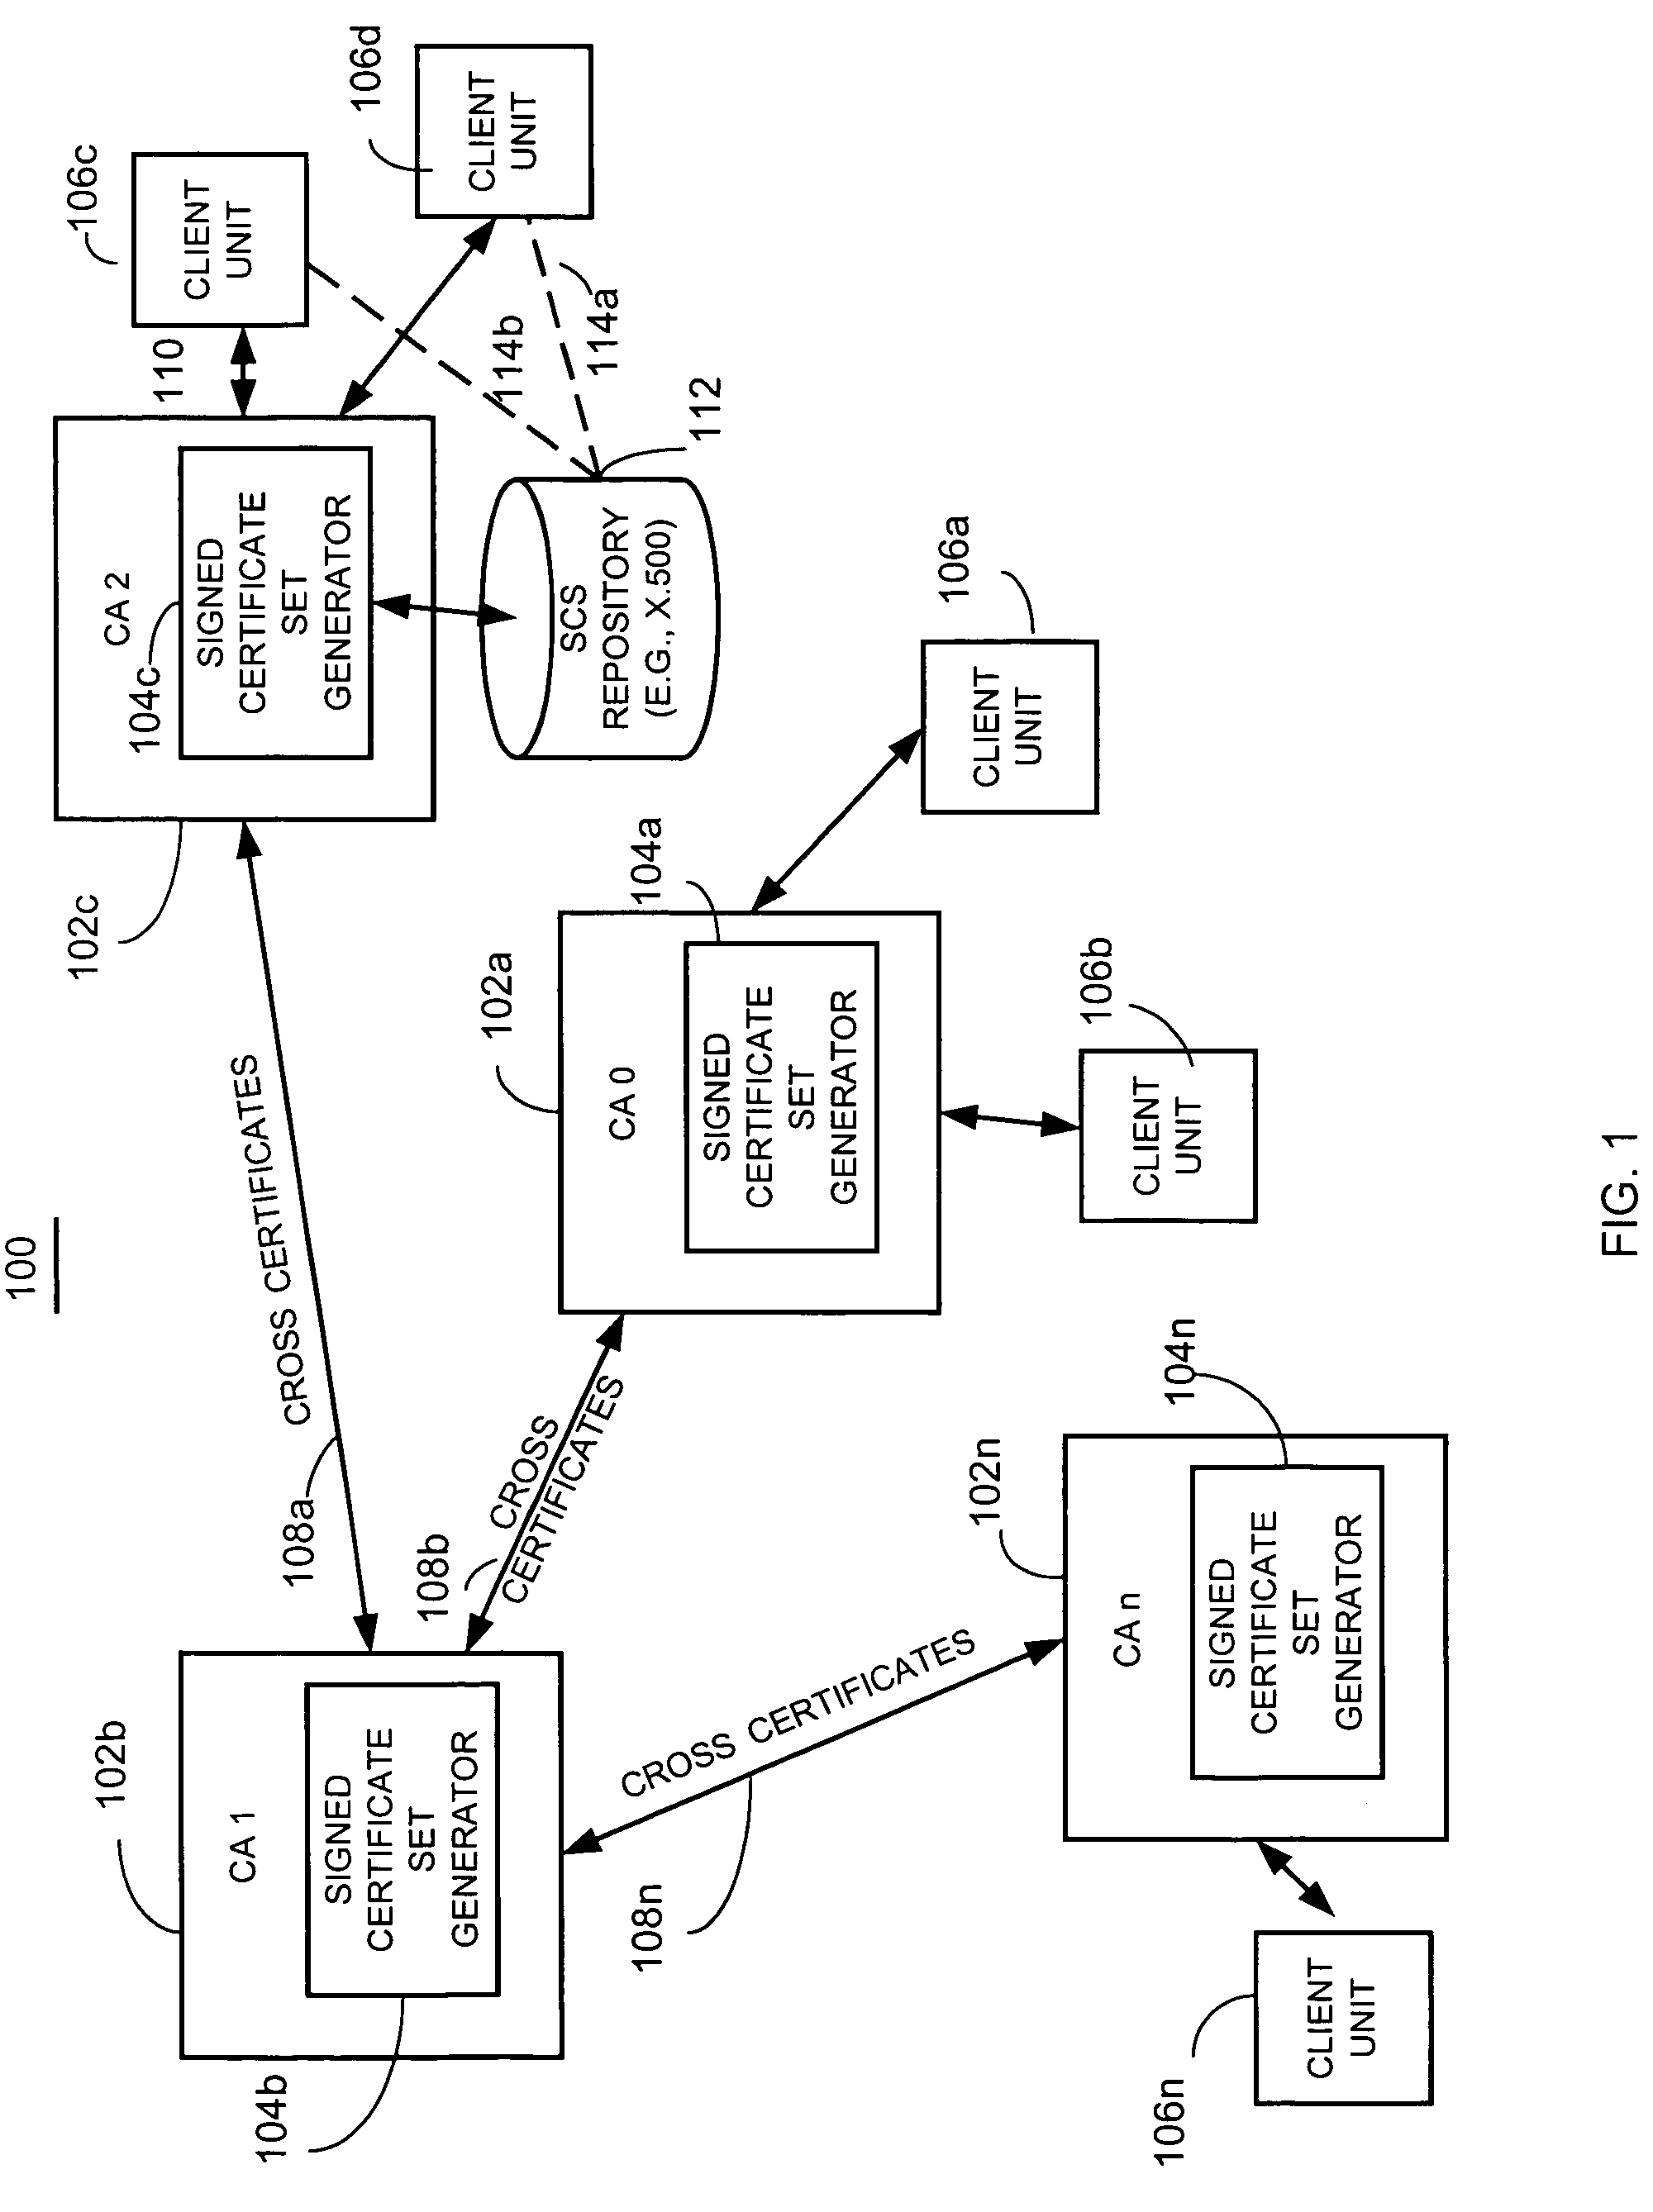 Method and apparatus improving efficiency of end-user certificate validation